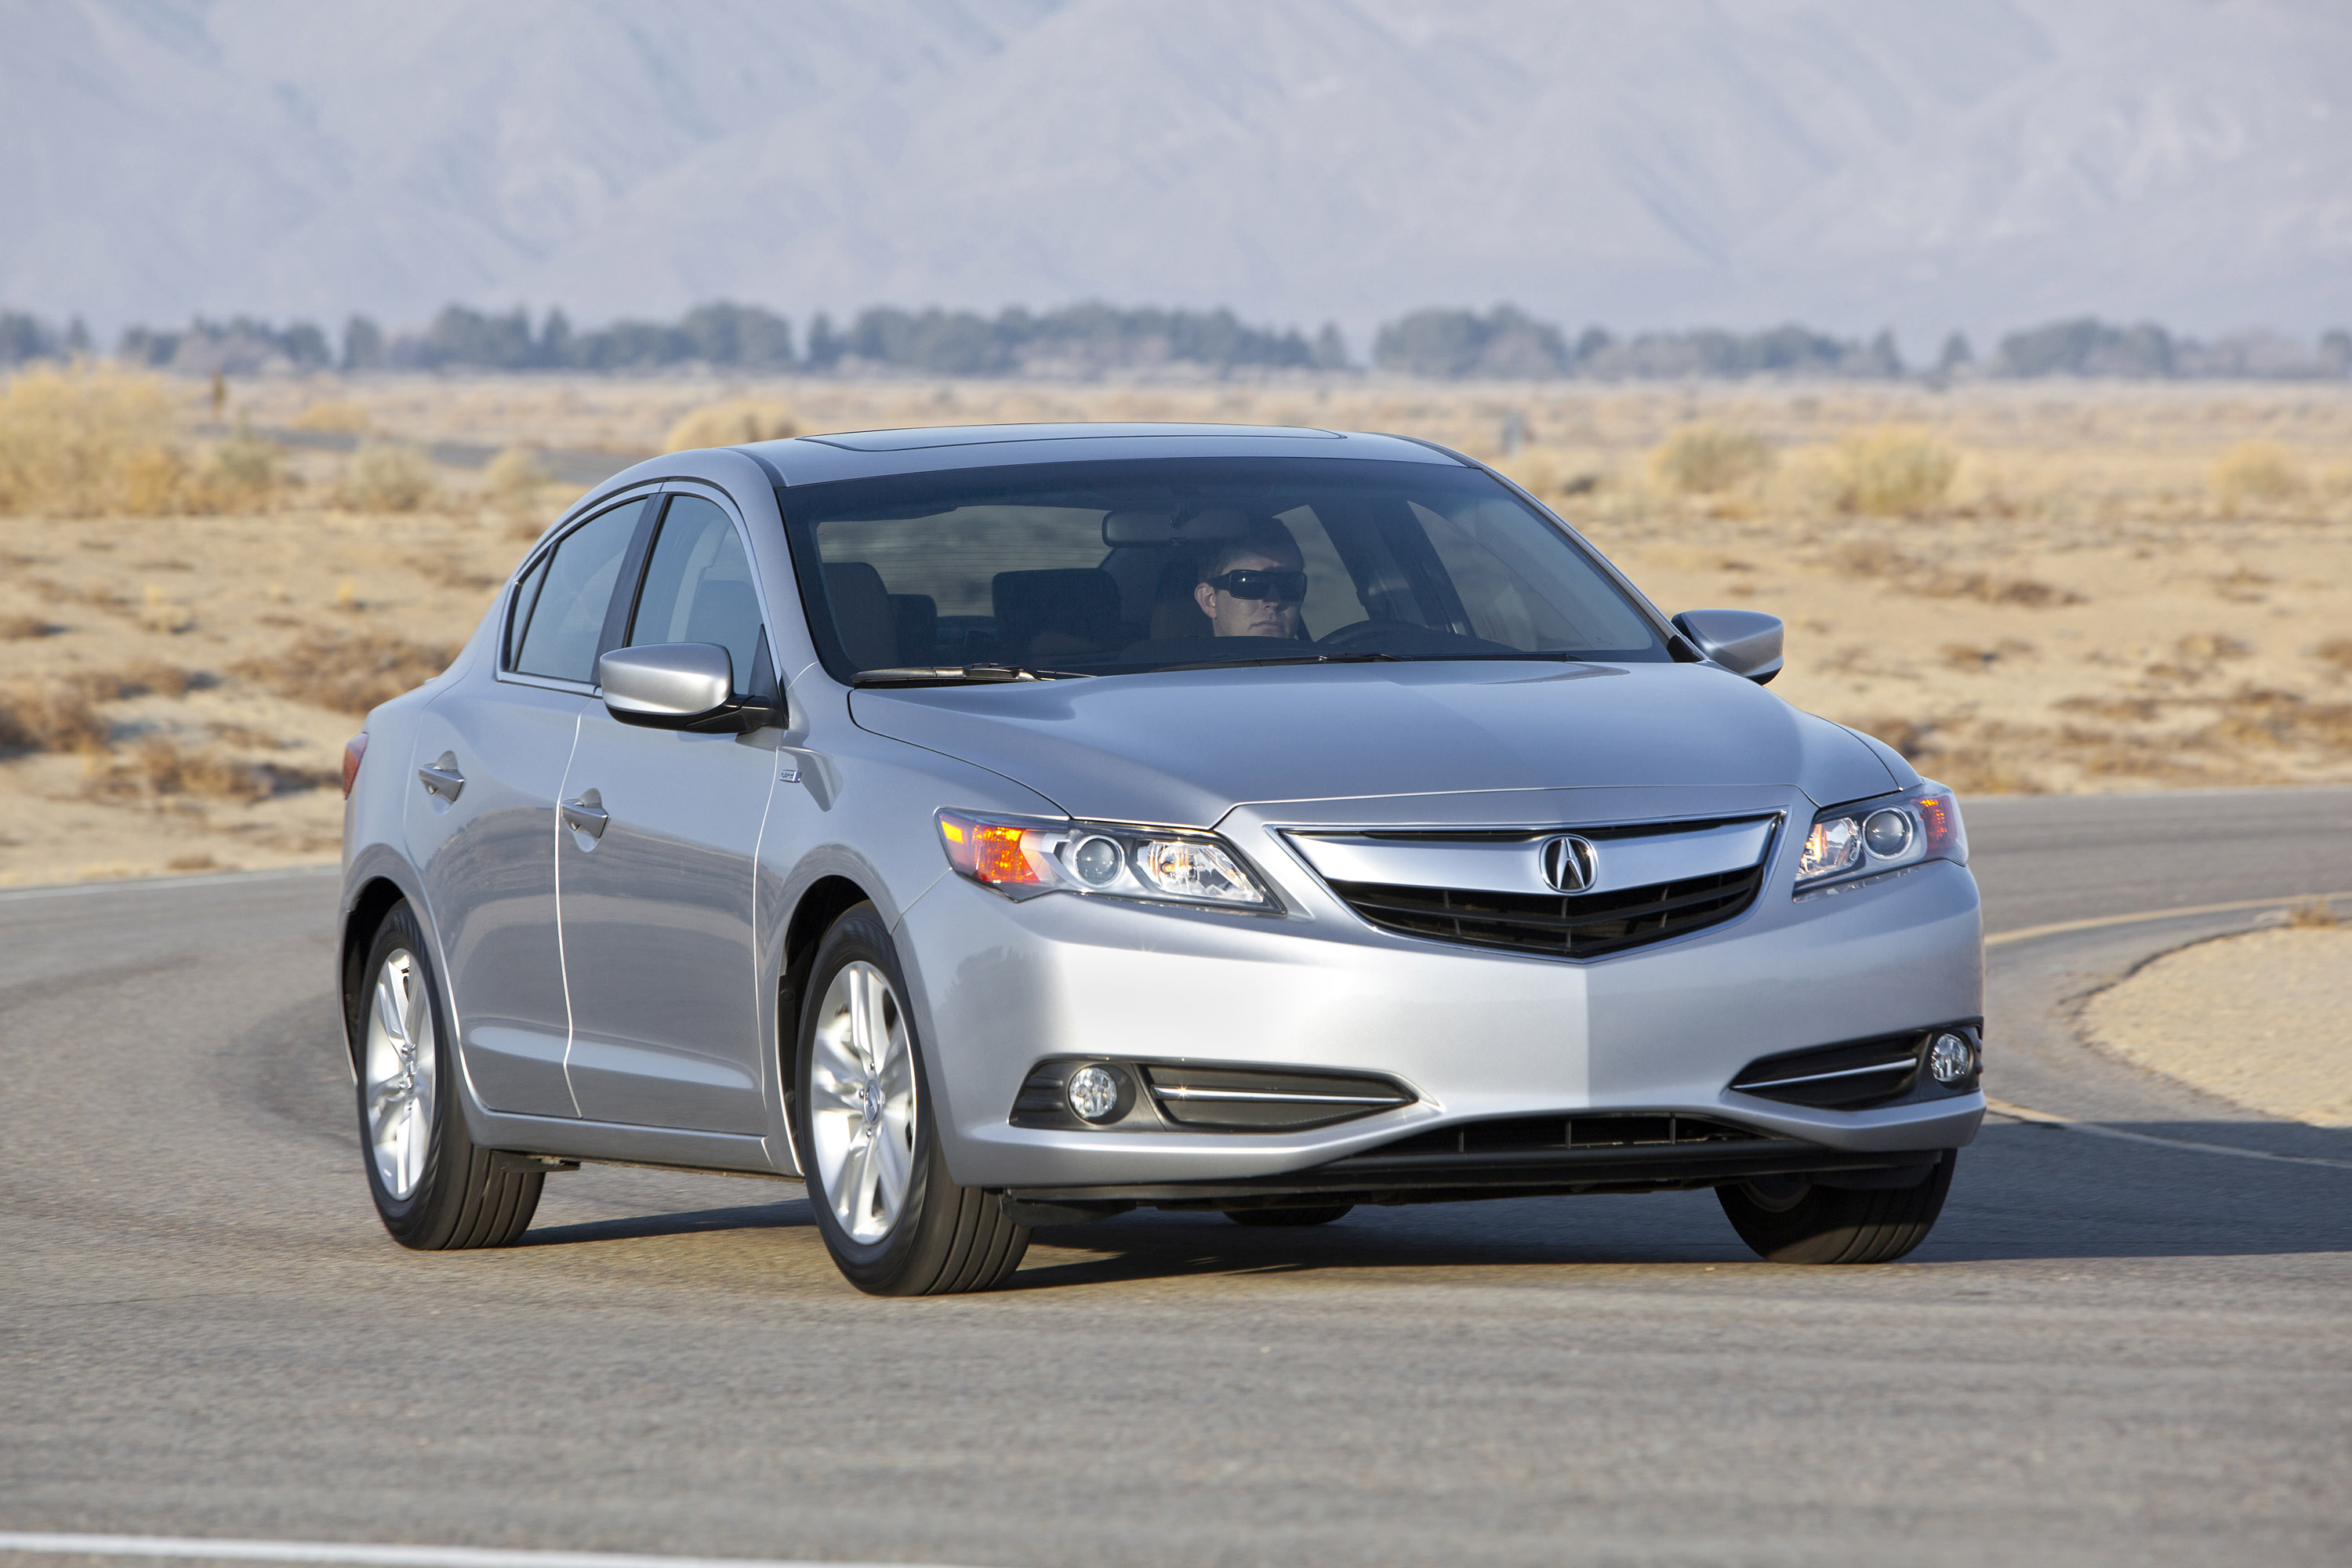 2014 Acura ILX Hybrid Goes On Sale Today